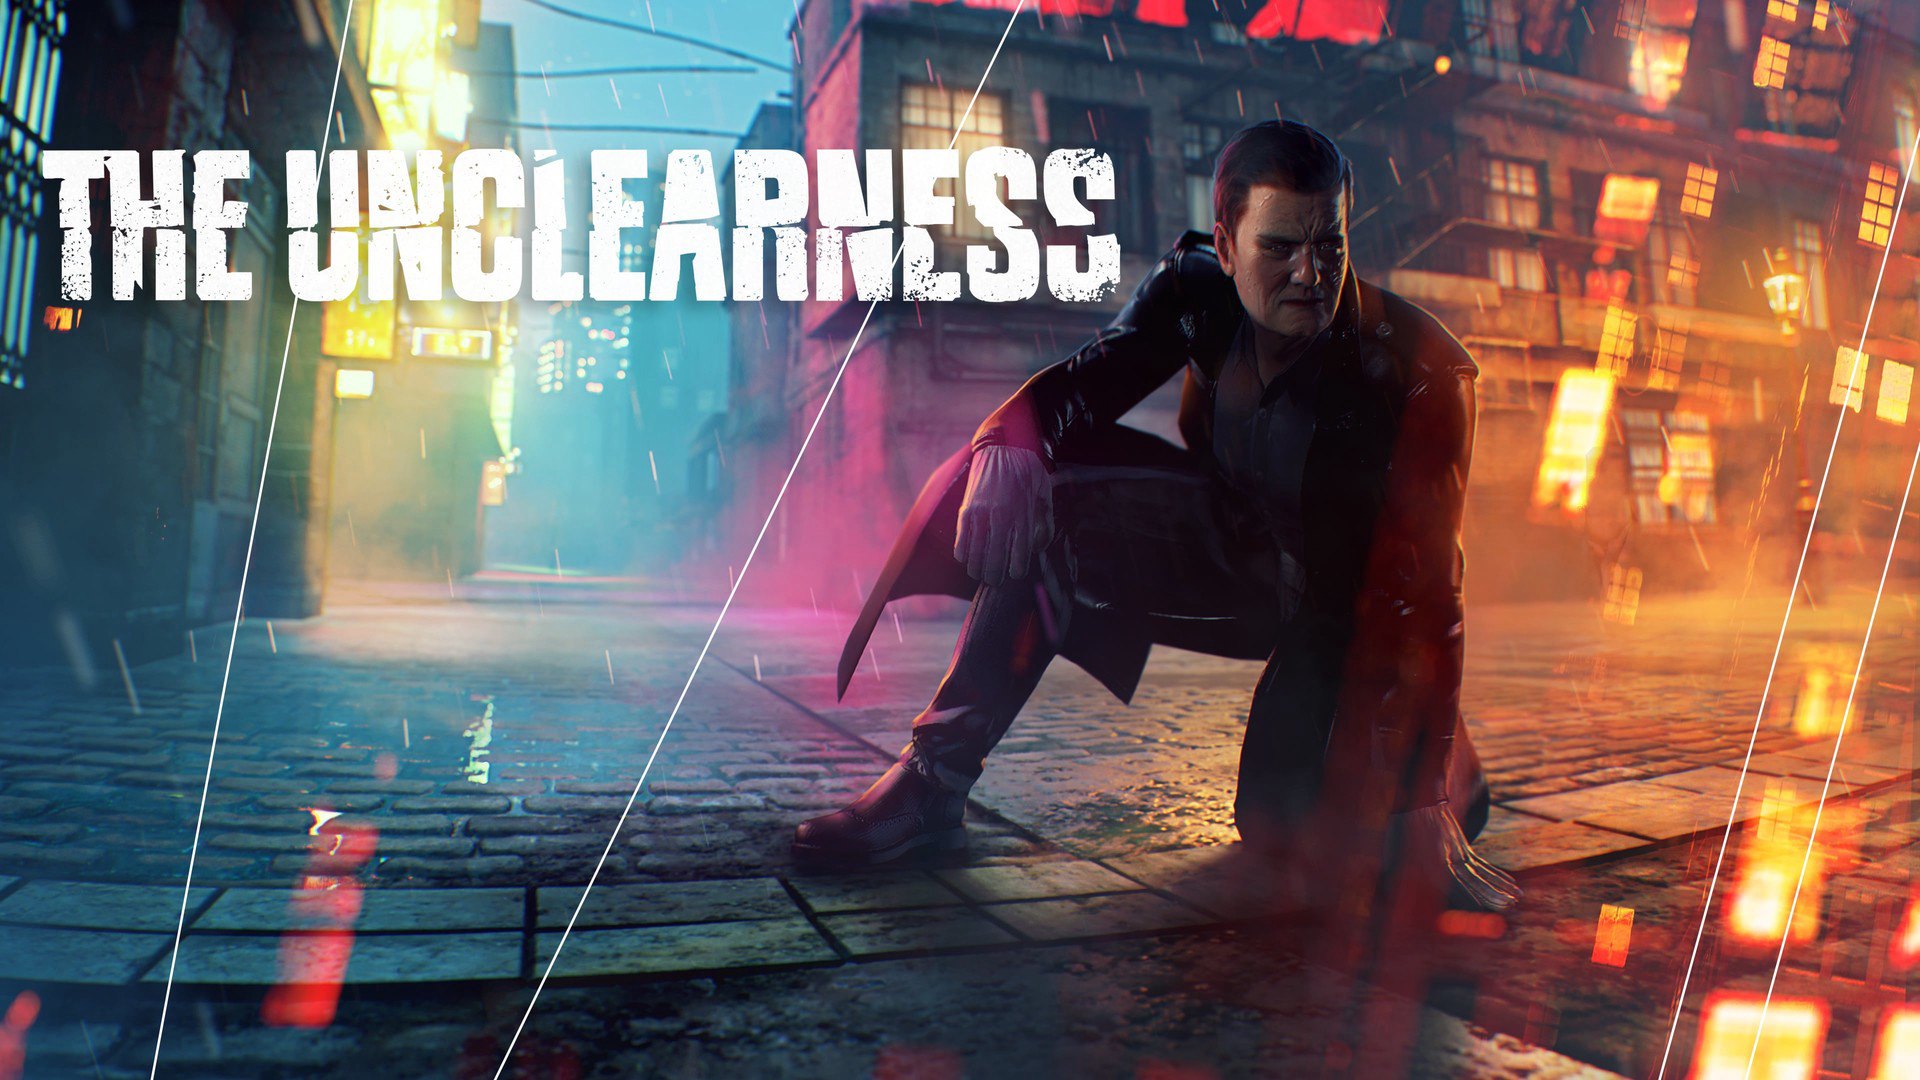 [$ 6.77] THE UNCLEARNESS Steam CD Key